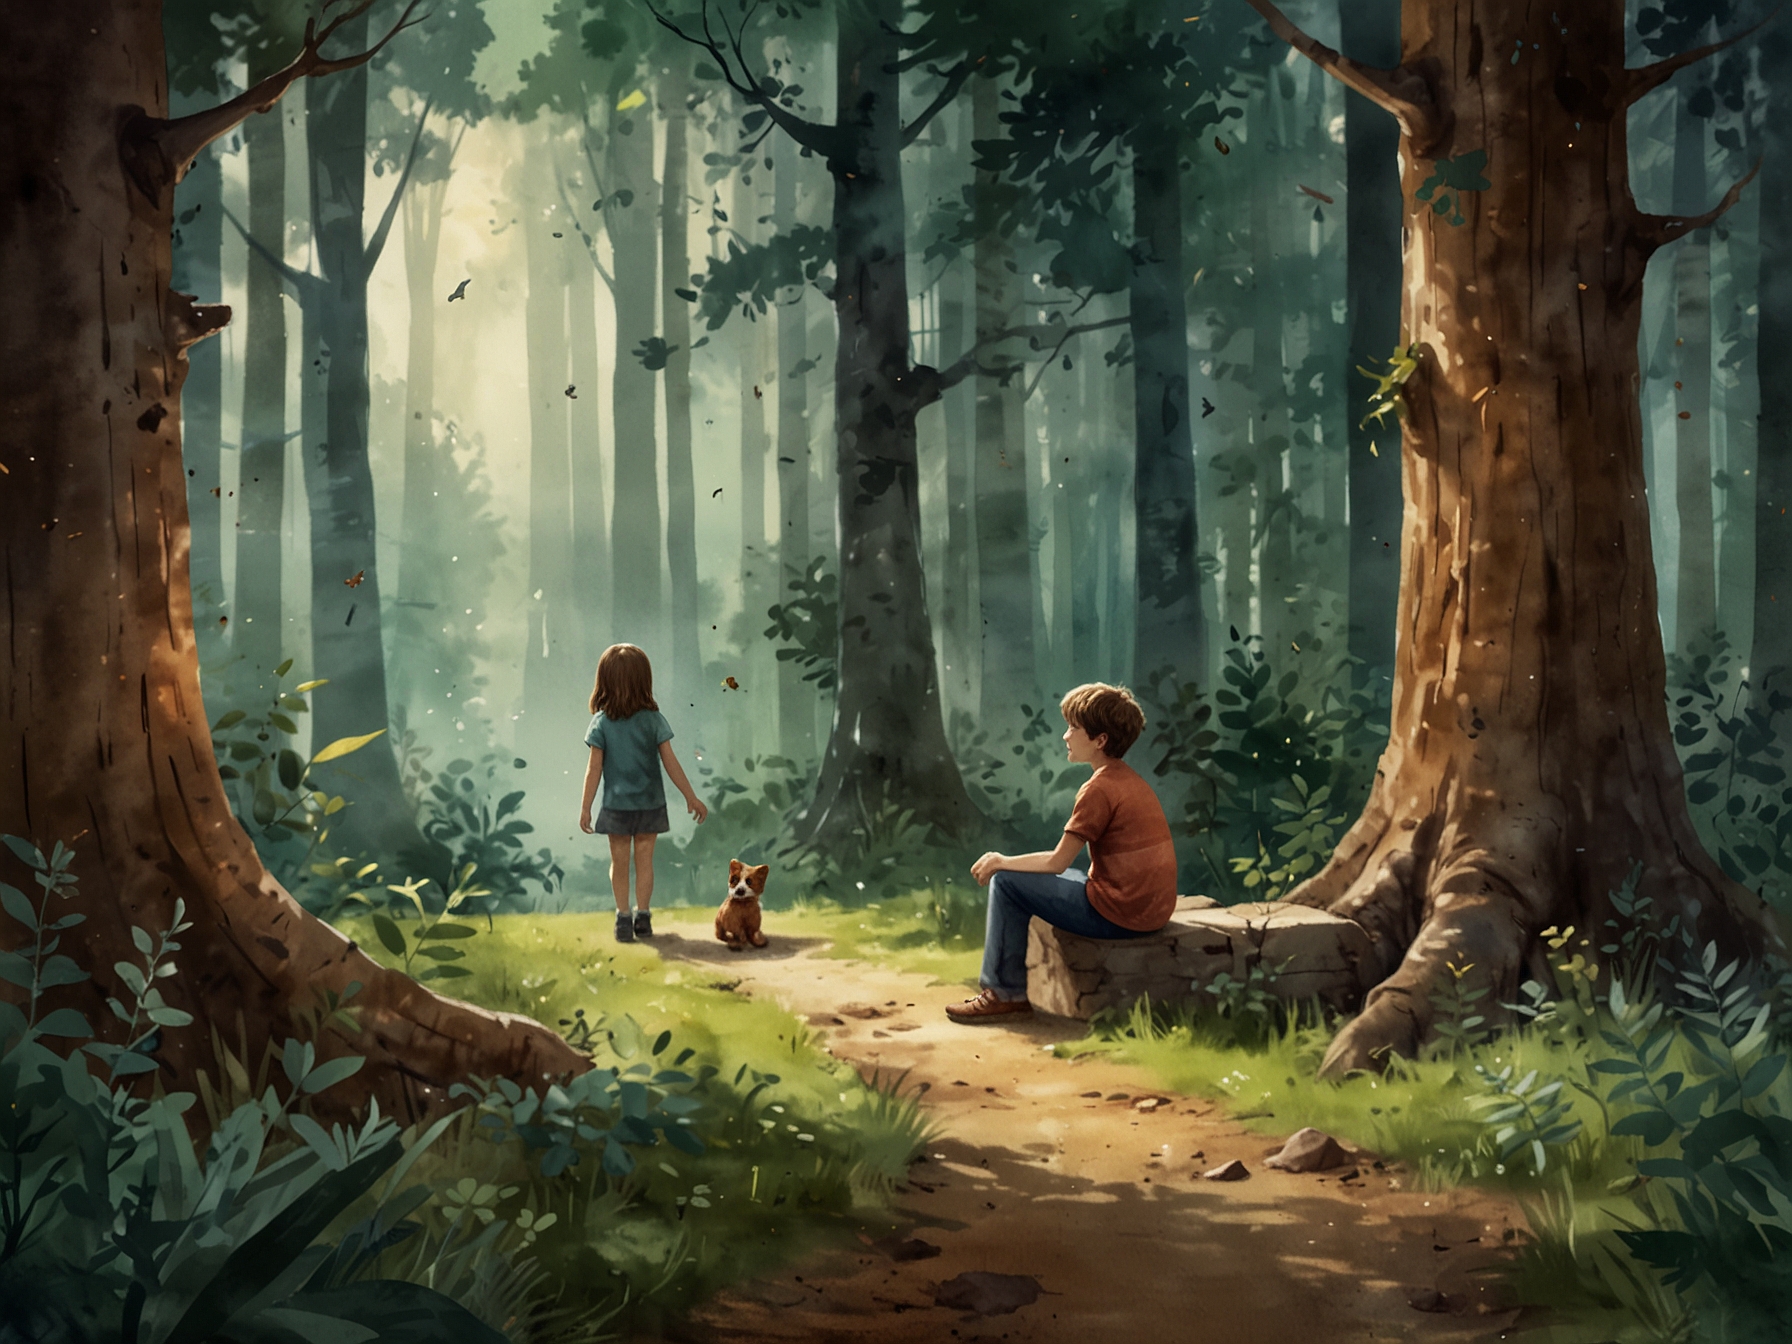 A heartwarming scene where Rudger, the imaginary friend, and Amanda share a playful moment in a dreamy, watercolor-like forest, capturing the innocence of childhood memories.